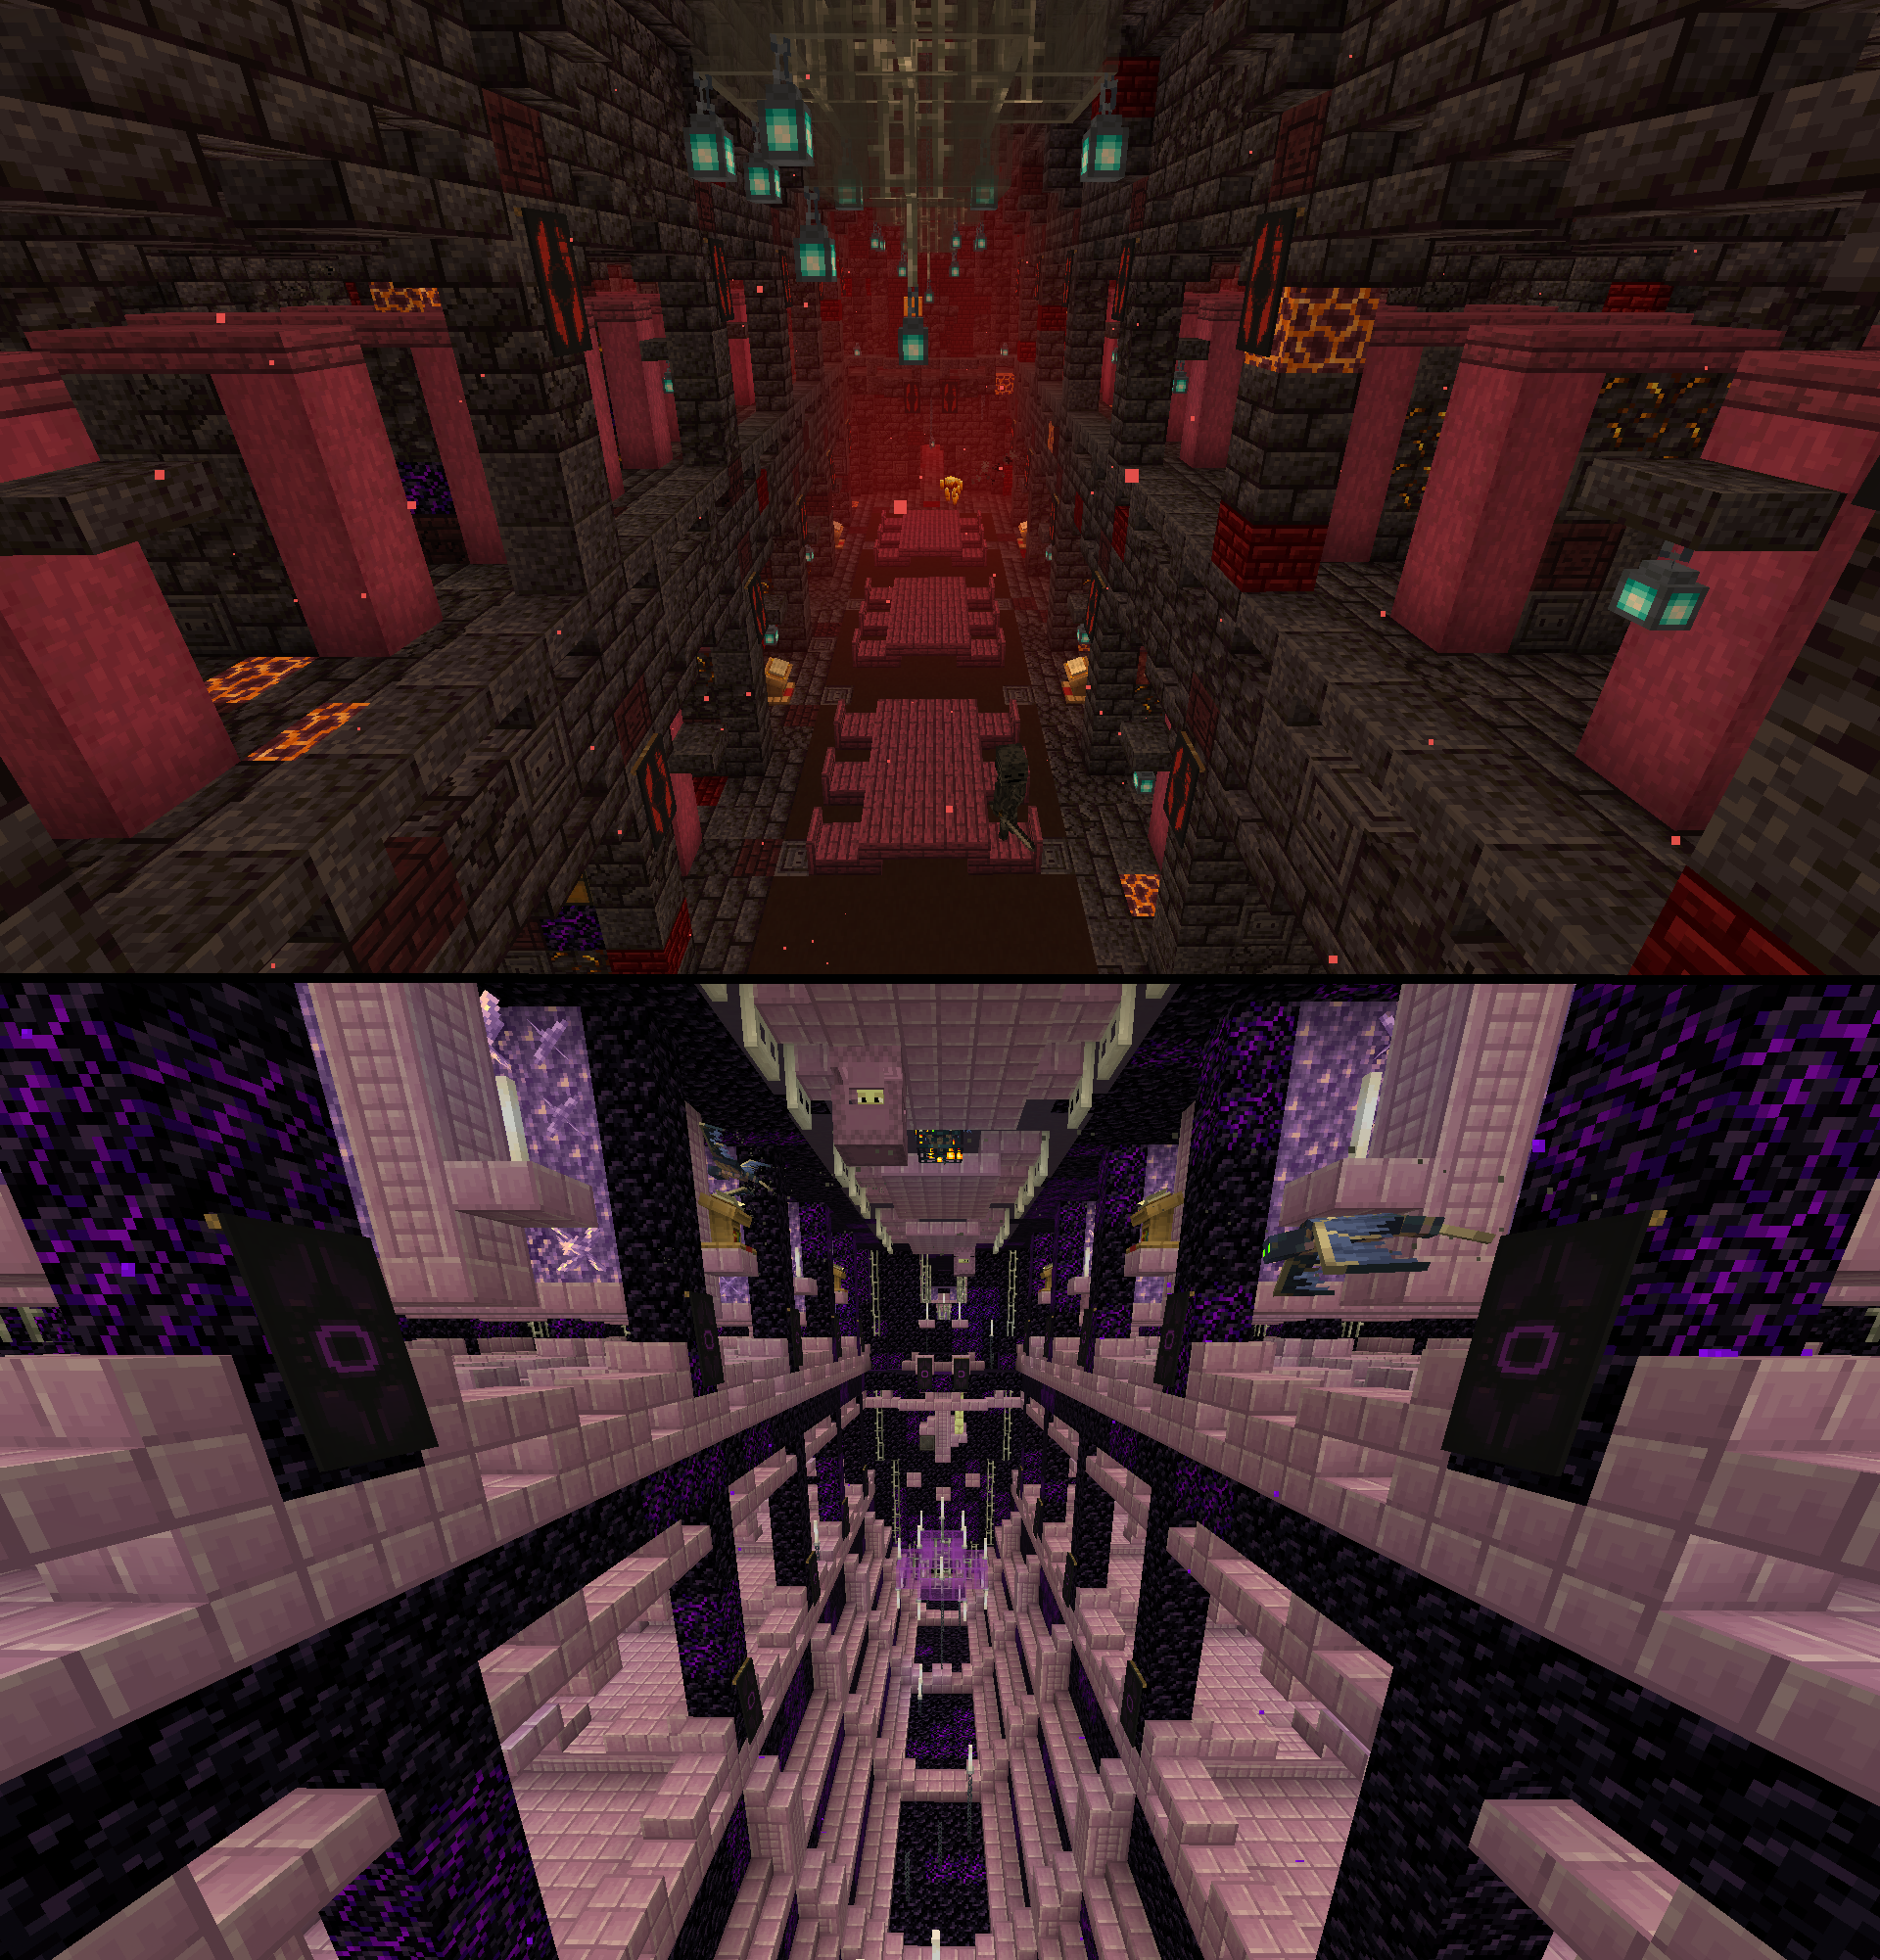 Nether and End Strongholds redesigned!